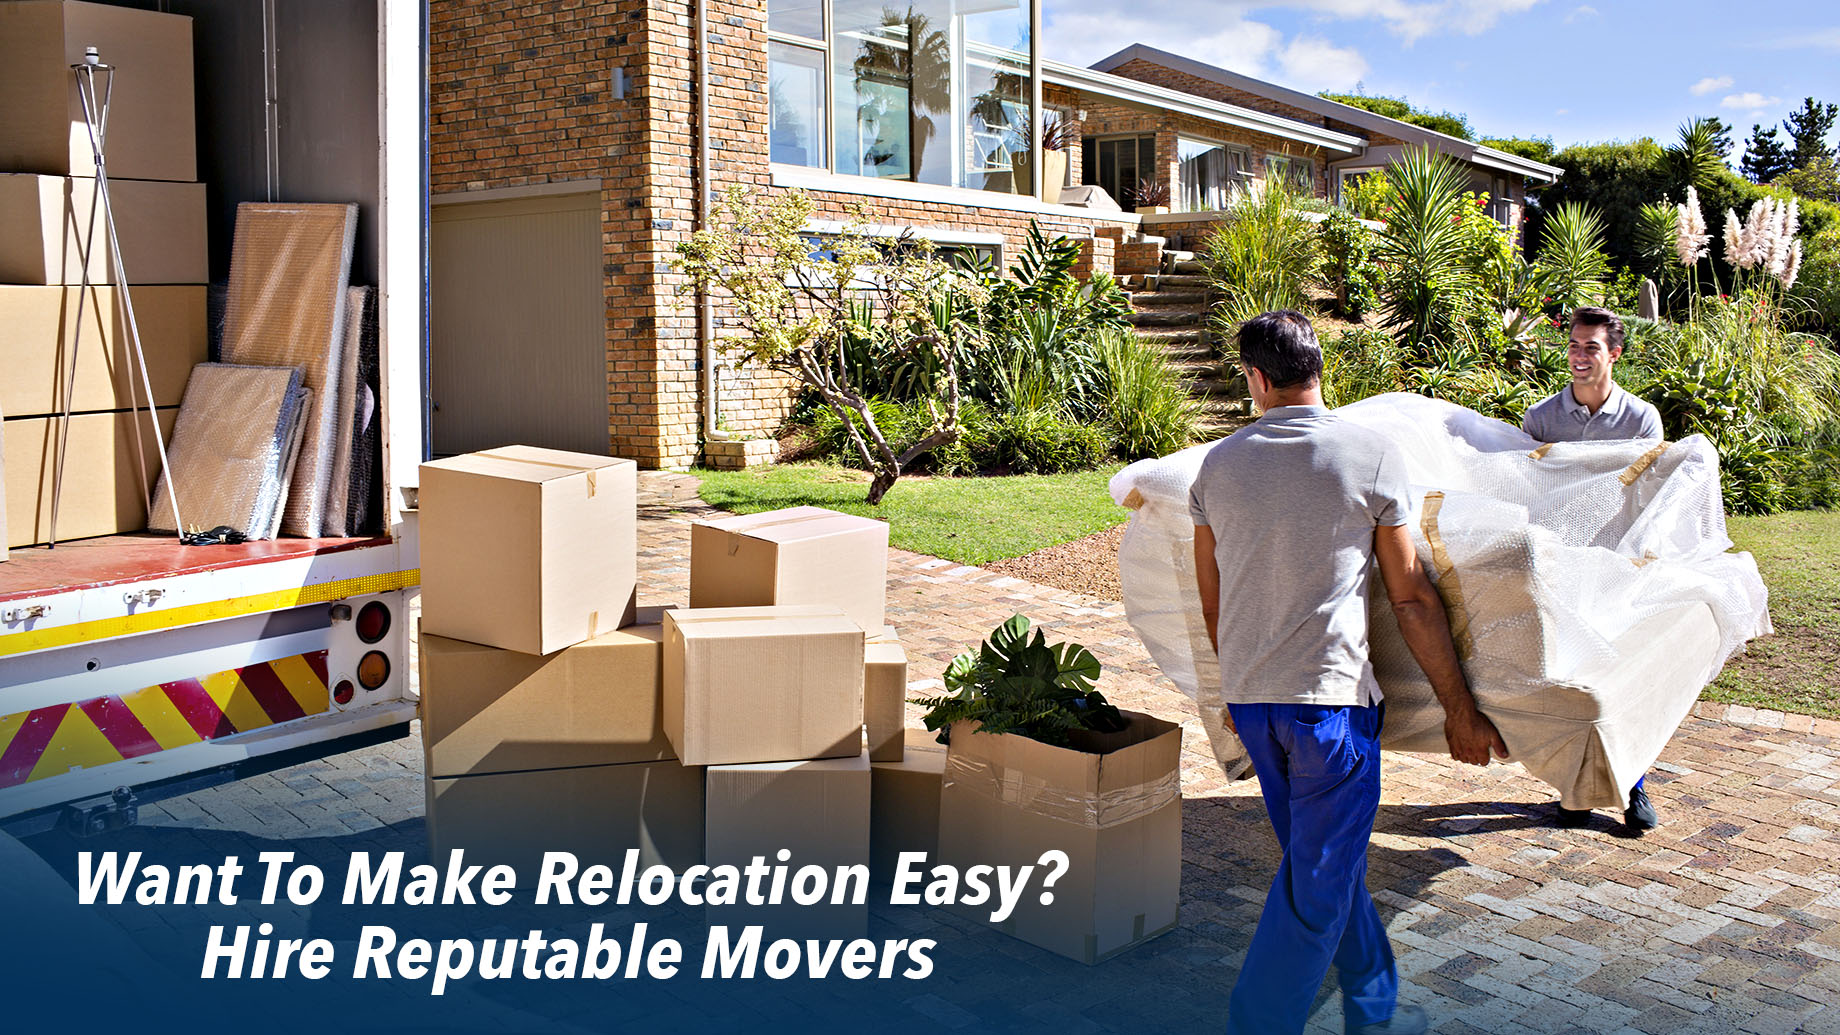 Want To Make Relocation Easy? Hire Reputable Movers